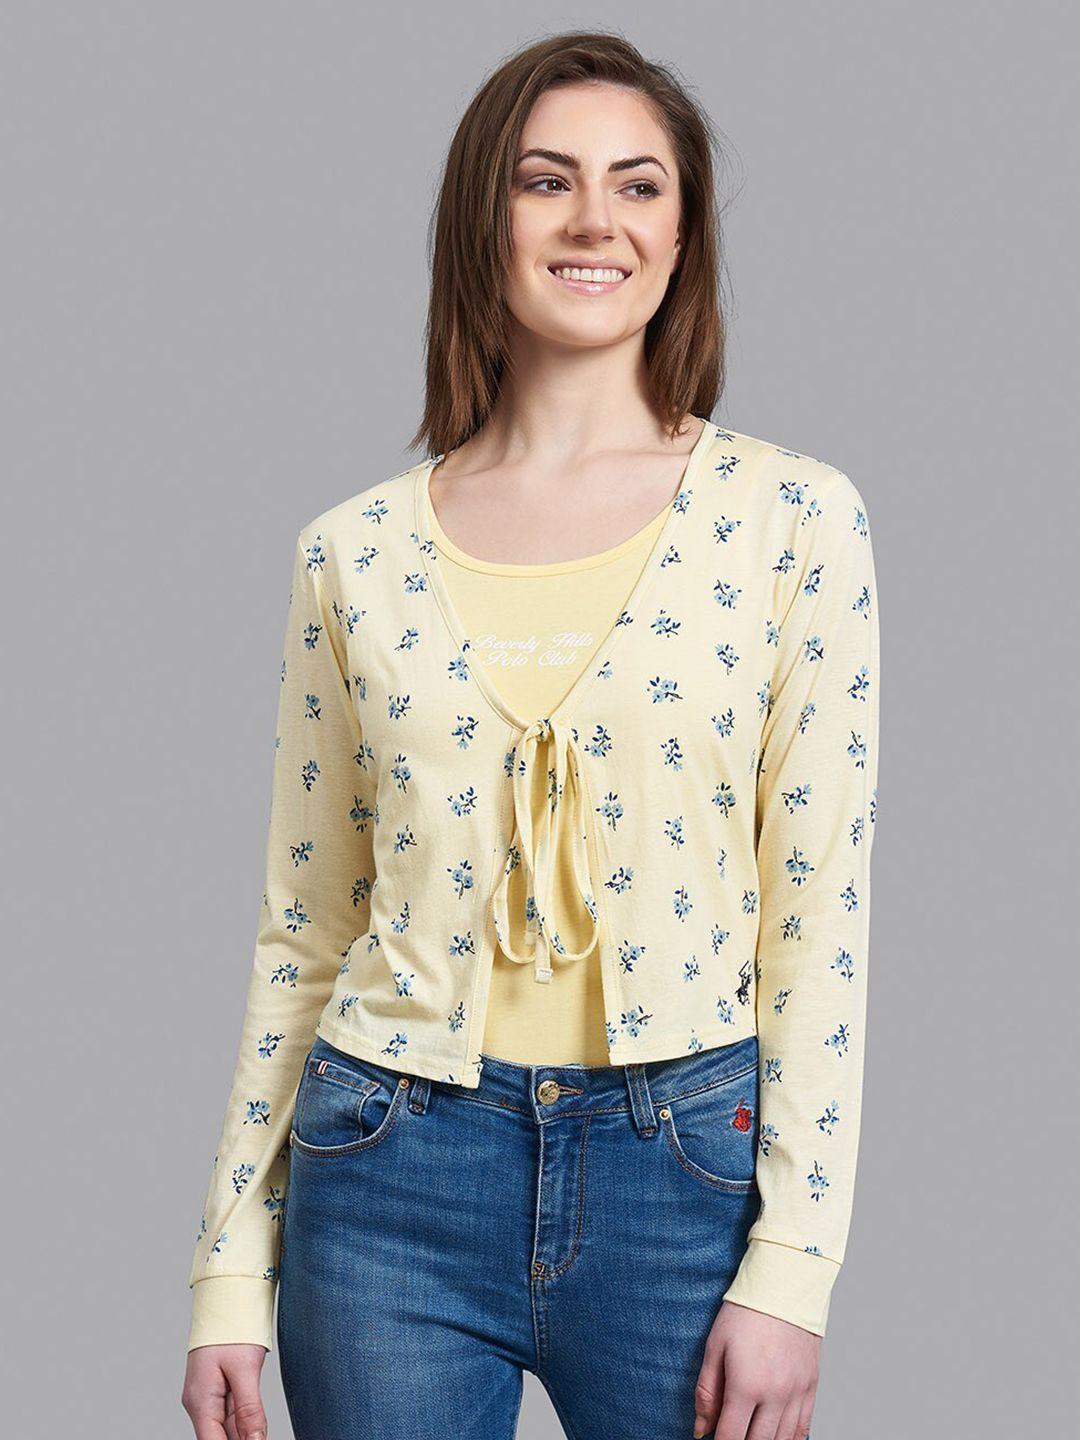 beverly-hills-polo-club-women-yellow-&-blue-floral-printed-cardigan